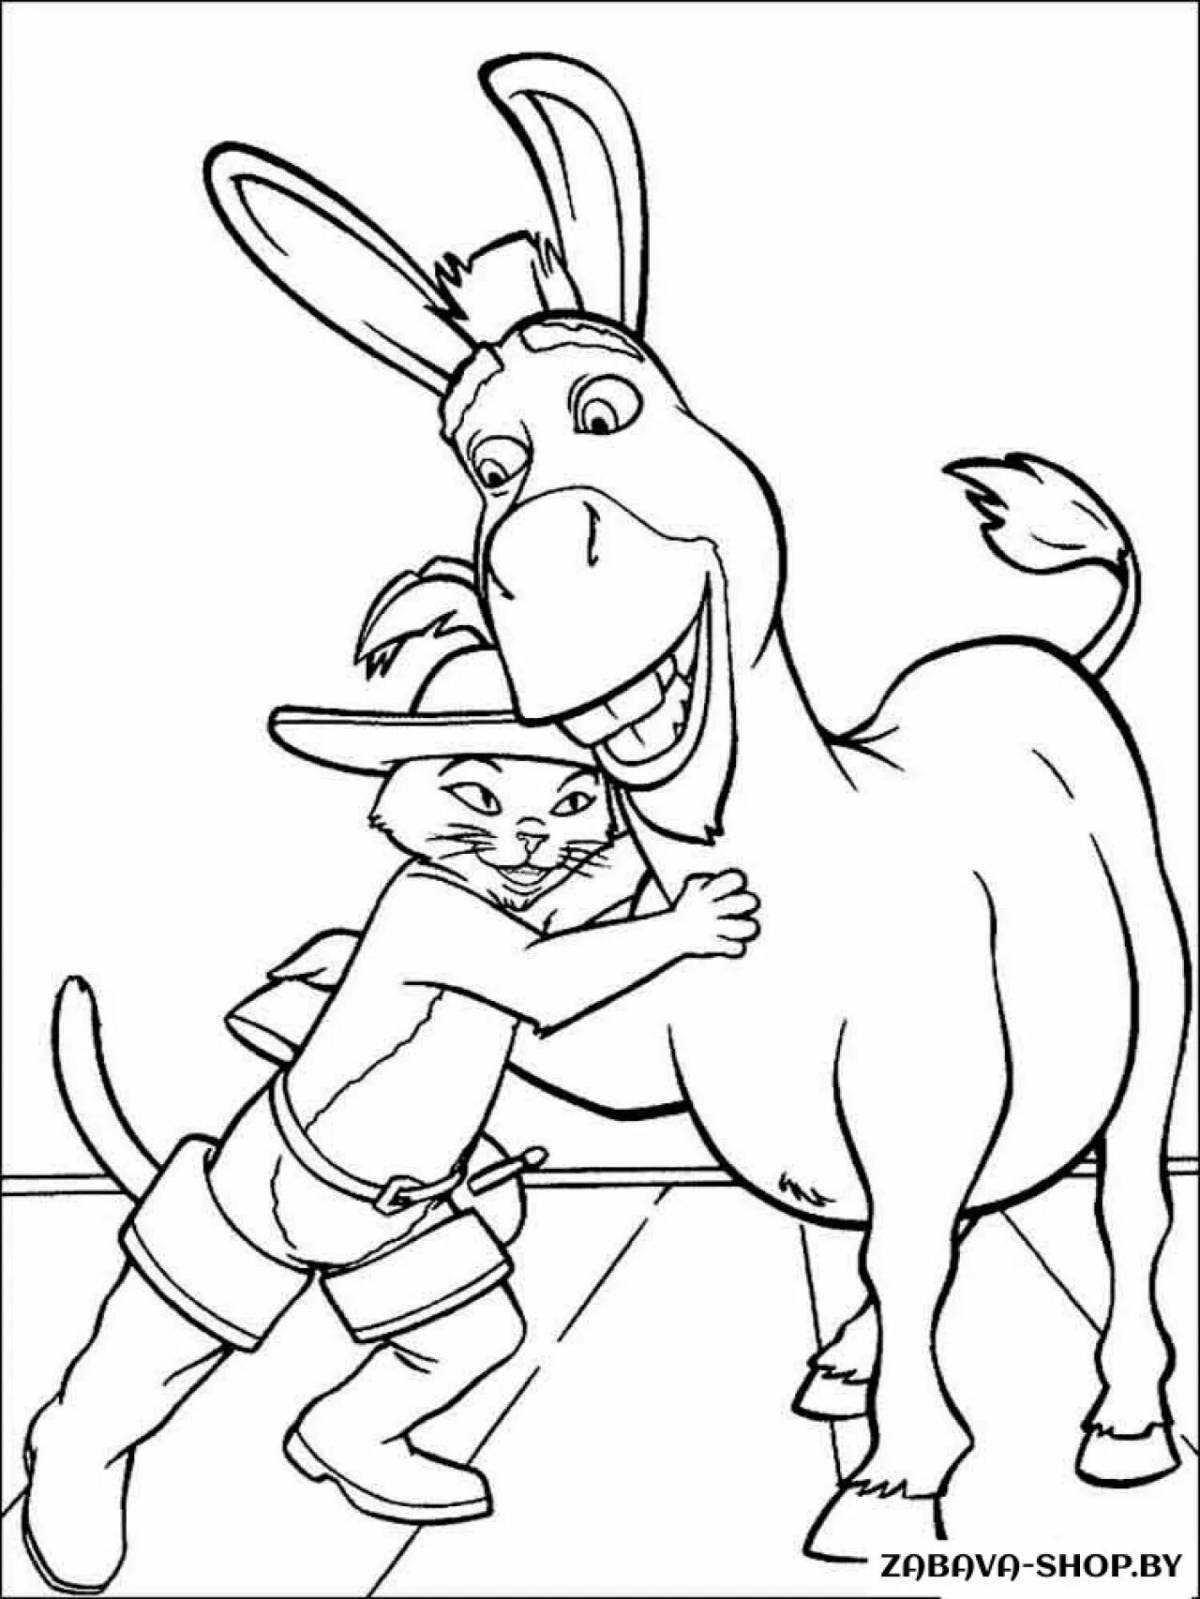 Exalted shrek dragon coloring page